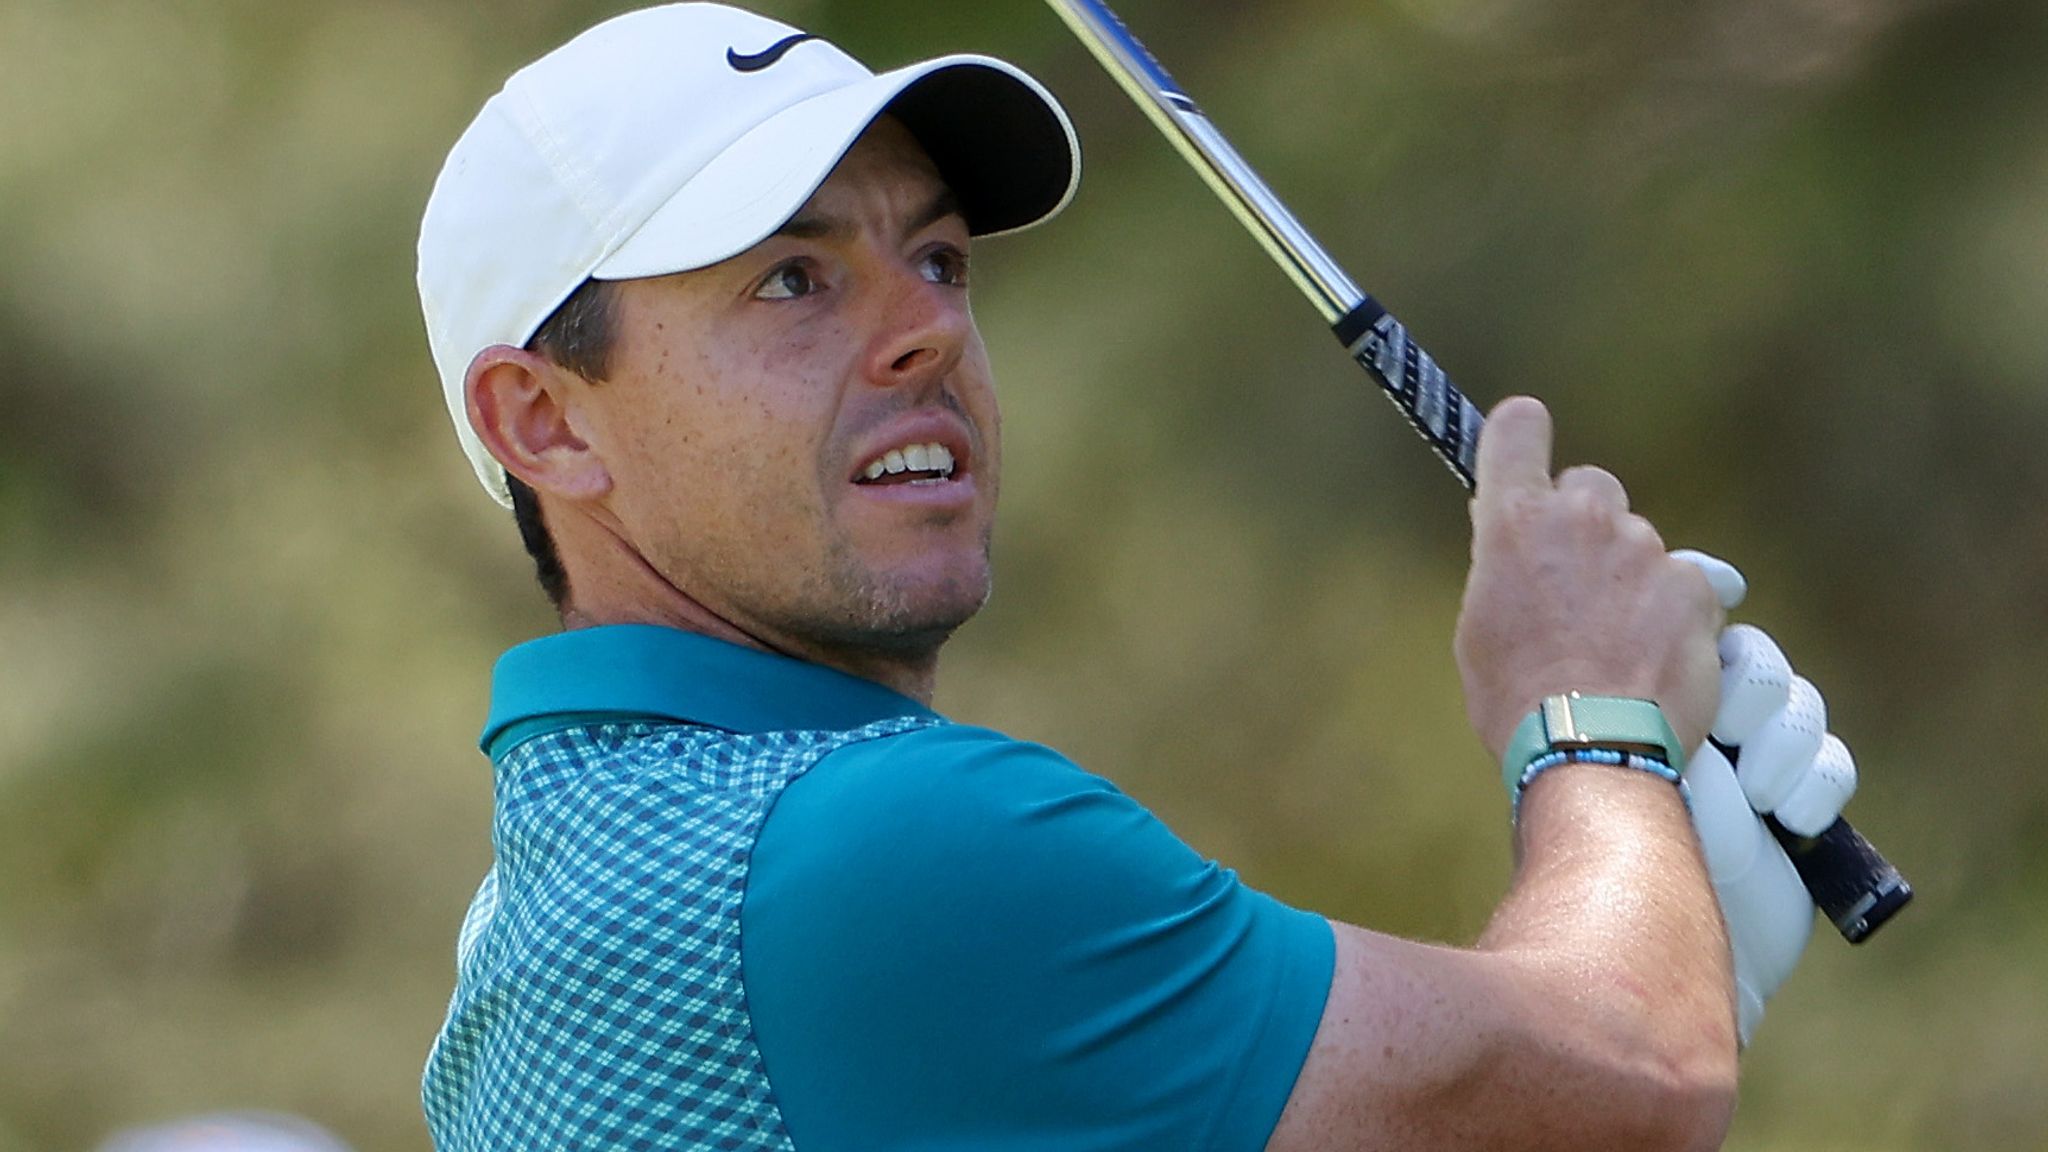 What do Rory McIlroy and Justin Thomas wear on their arms?